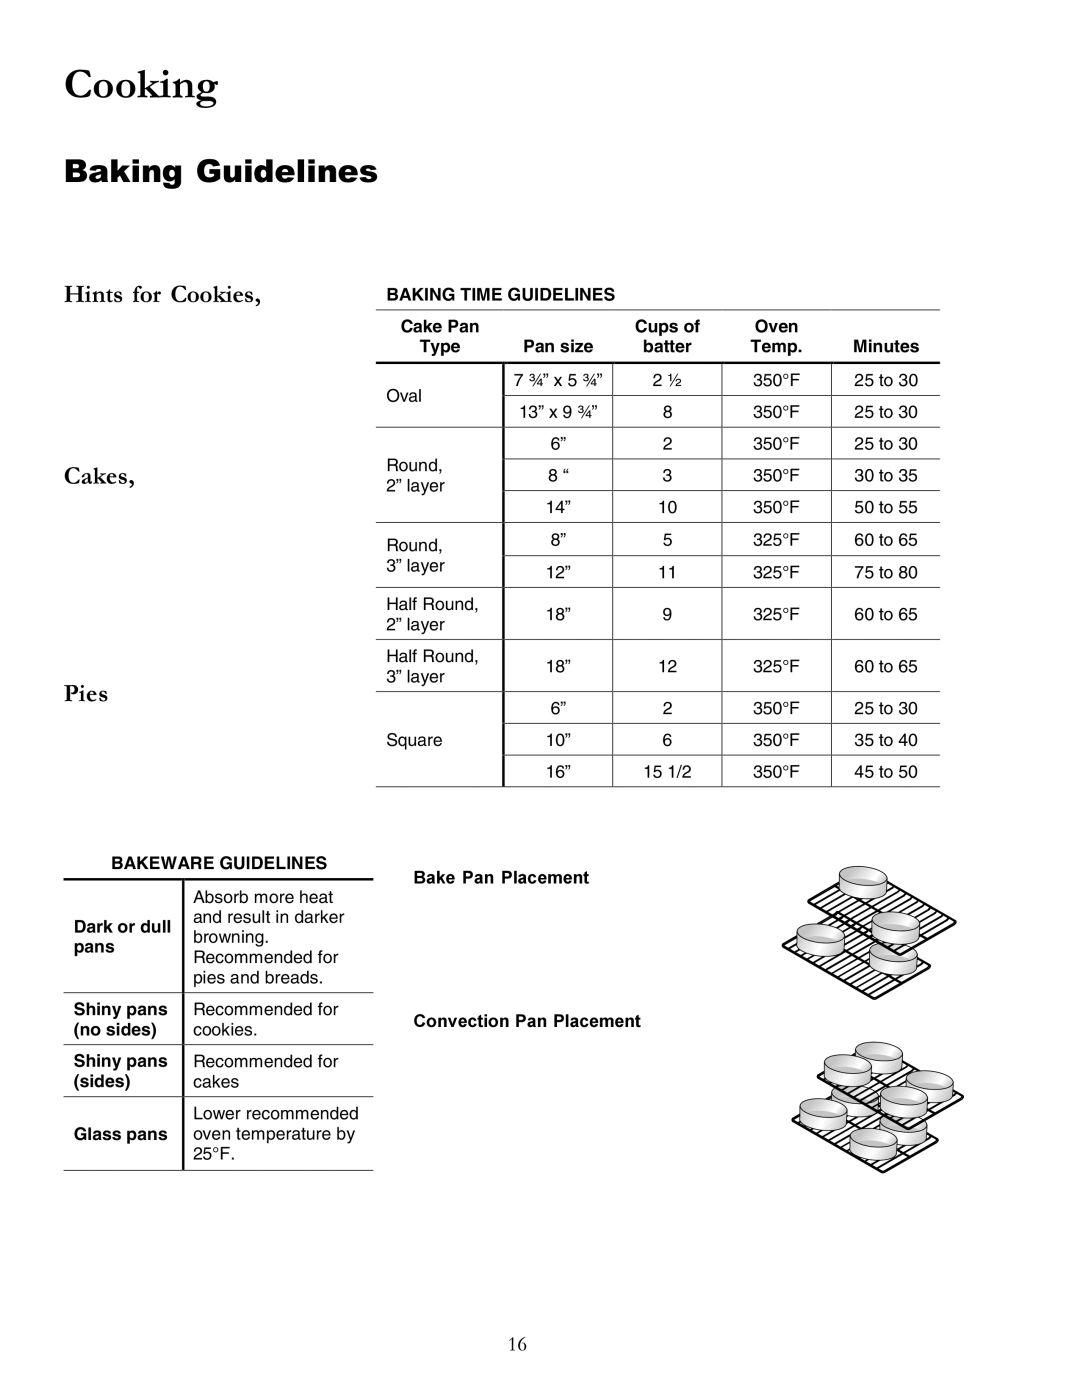 Amana ACS7270A, ACS7280A owner manual Cooking, Baking Guidelines, Hints for Cookies, Cakes, Pies 